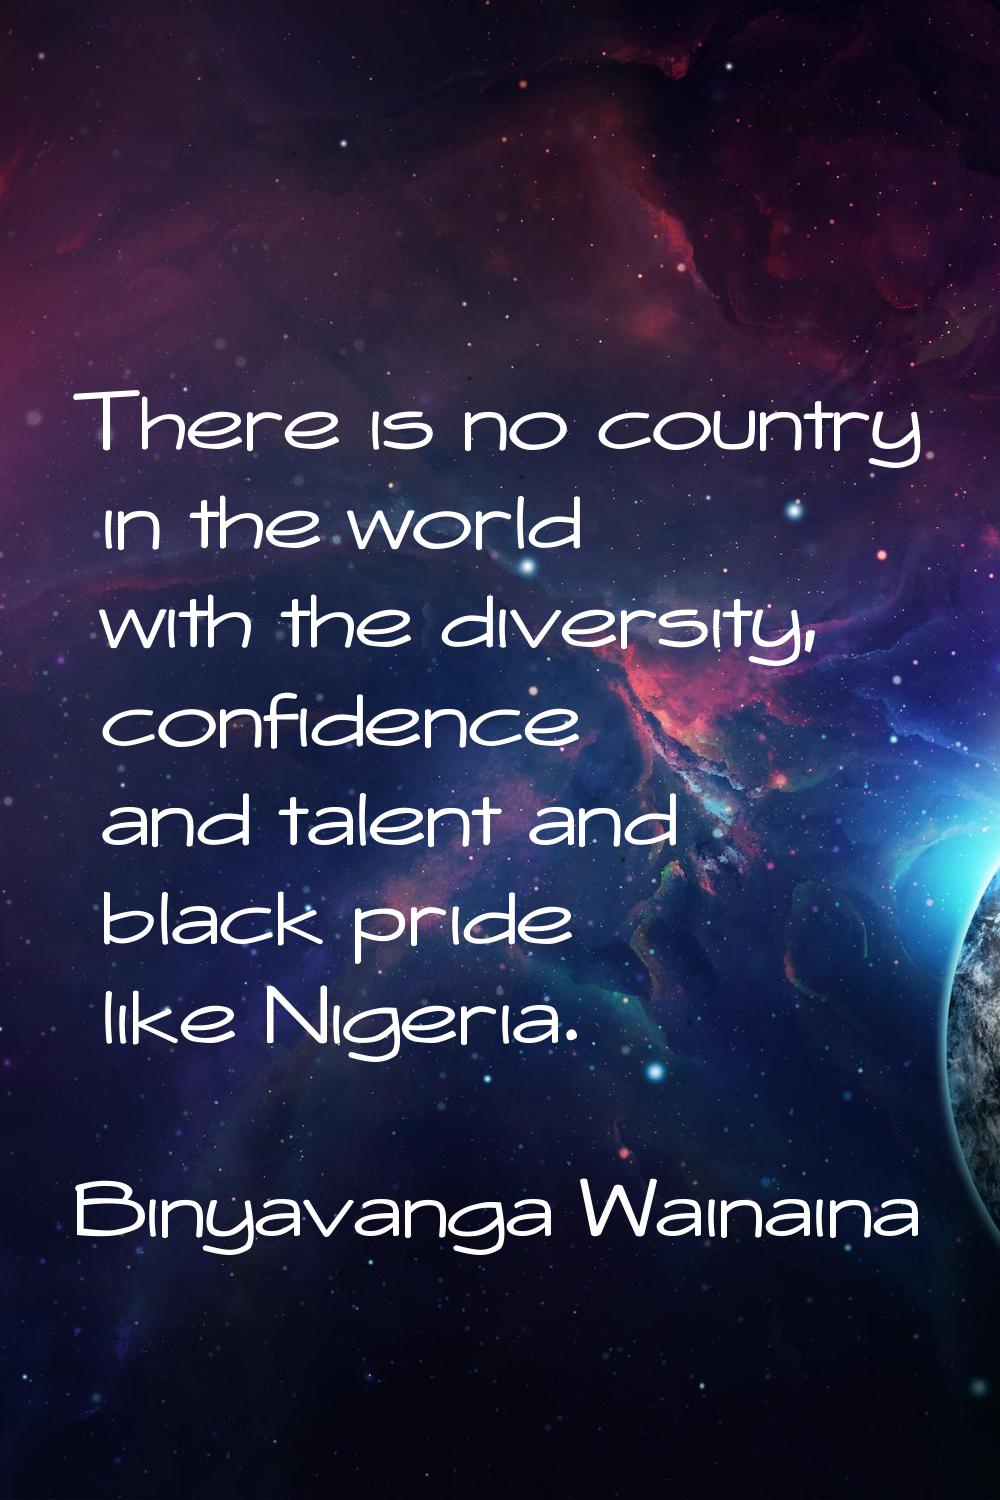 There is no country in the world with the diversity, confidence and talent and black pride like Nig